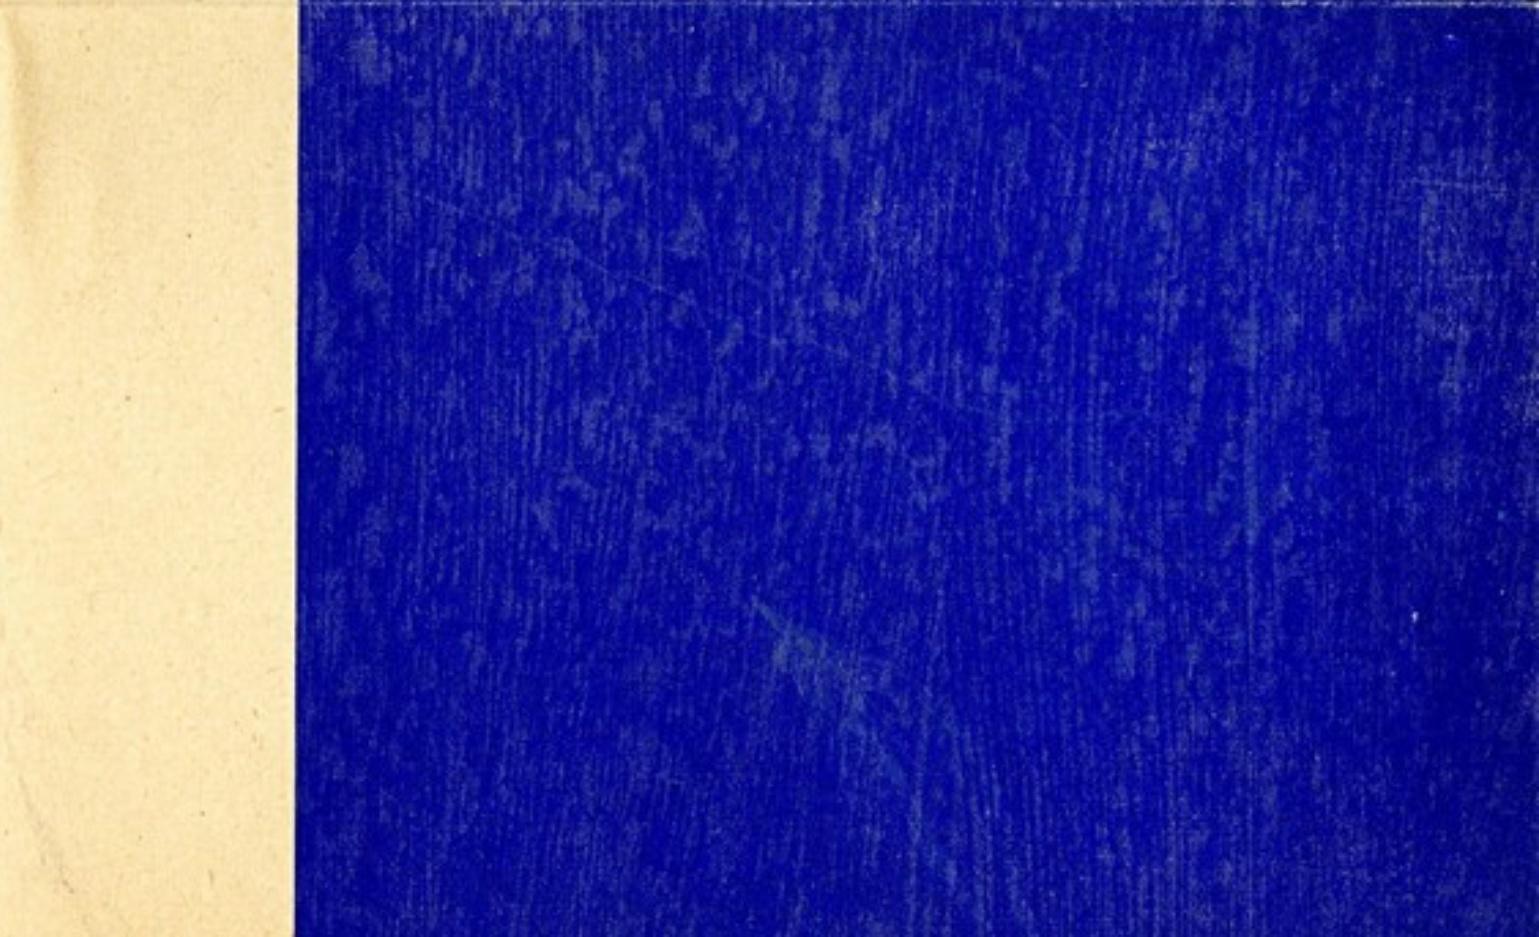 Yves Klein
Yves Klein Propositions Monochromes with IKB (International Klein Blue), 1957
Extremely rare fold-out silkscreened vintage invitation with IKB for Galerie Schmela exhibition
8 1/4 × 11 3/4 inches
Original Invitation for the exhibition